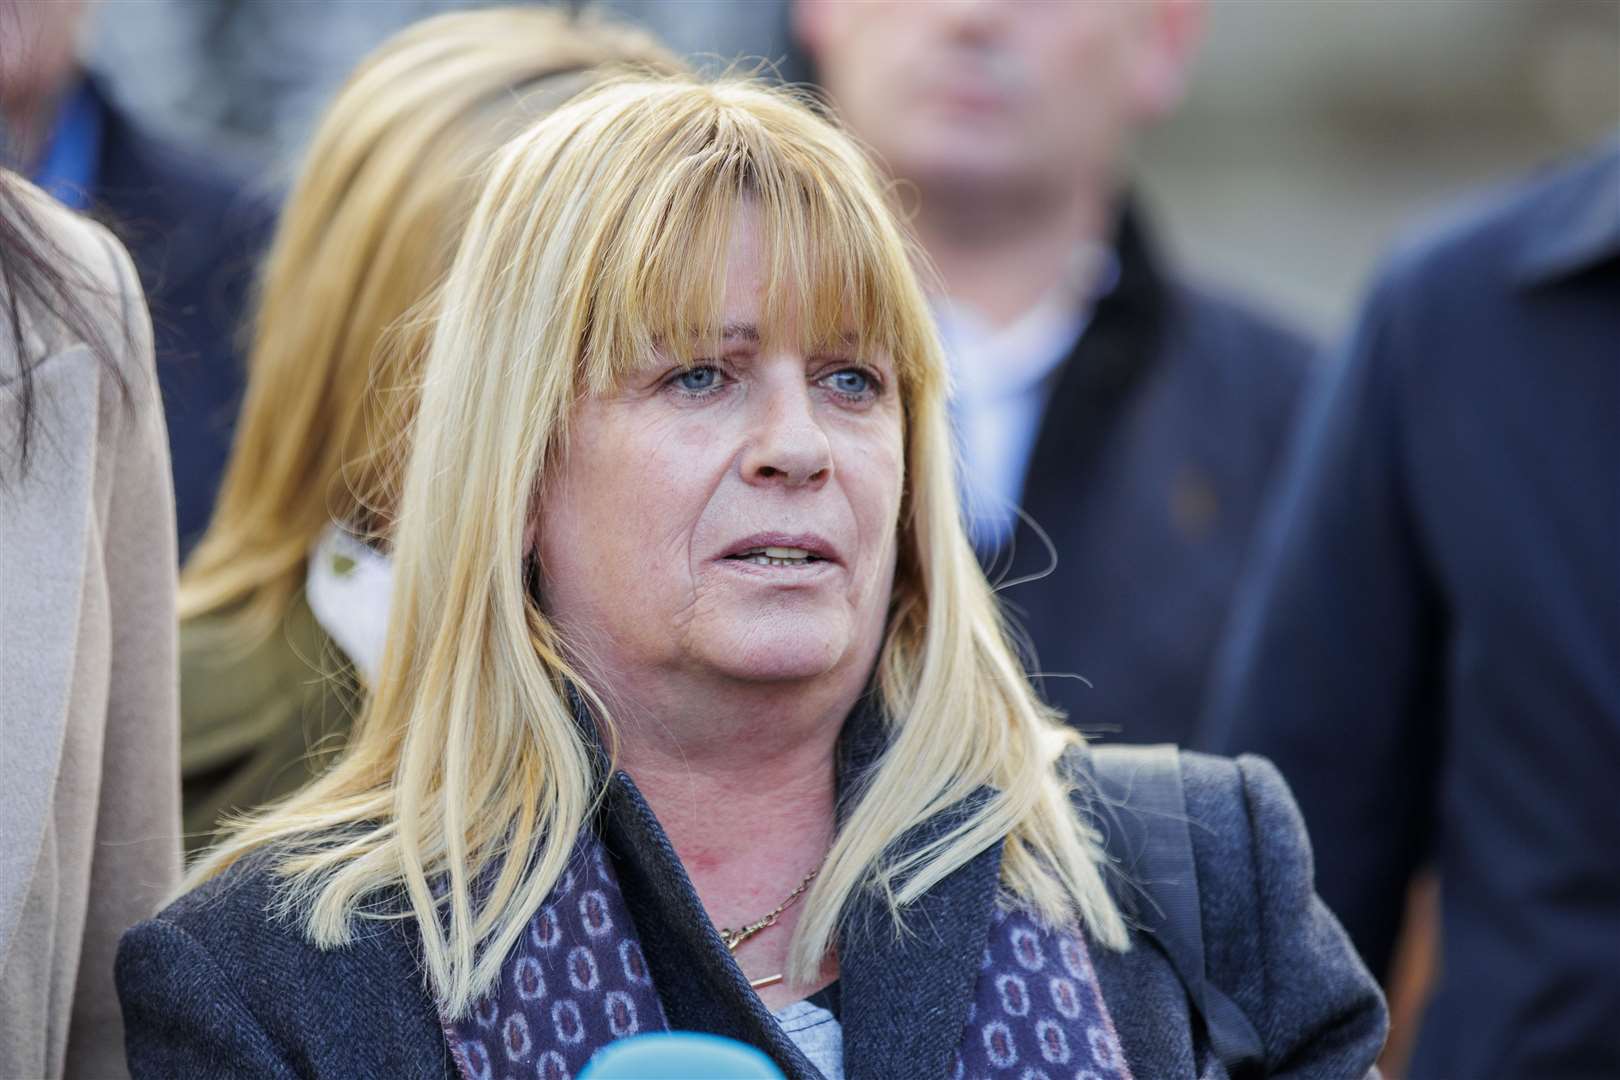 Troubles victim Martina Dillon at the Royal Courts of Justice (Liam McBurney/PA)